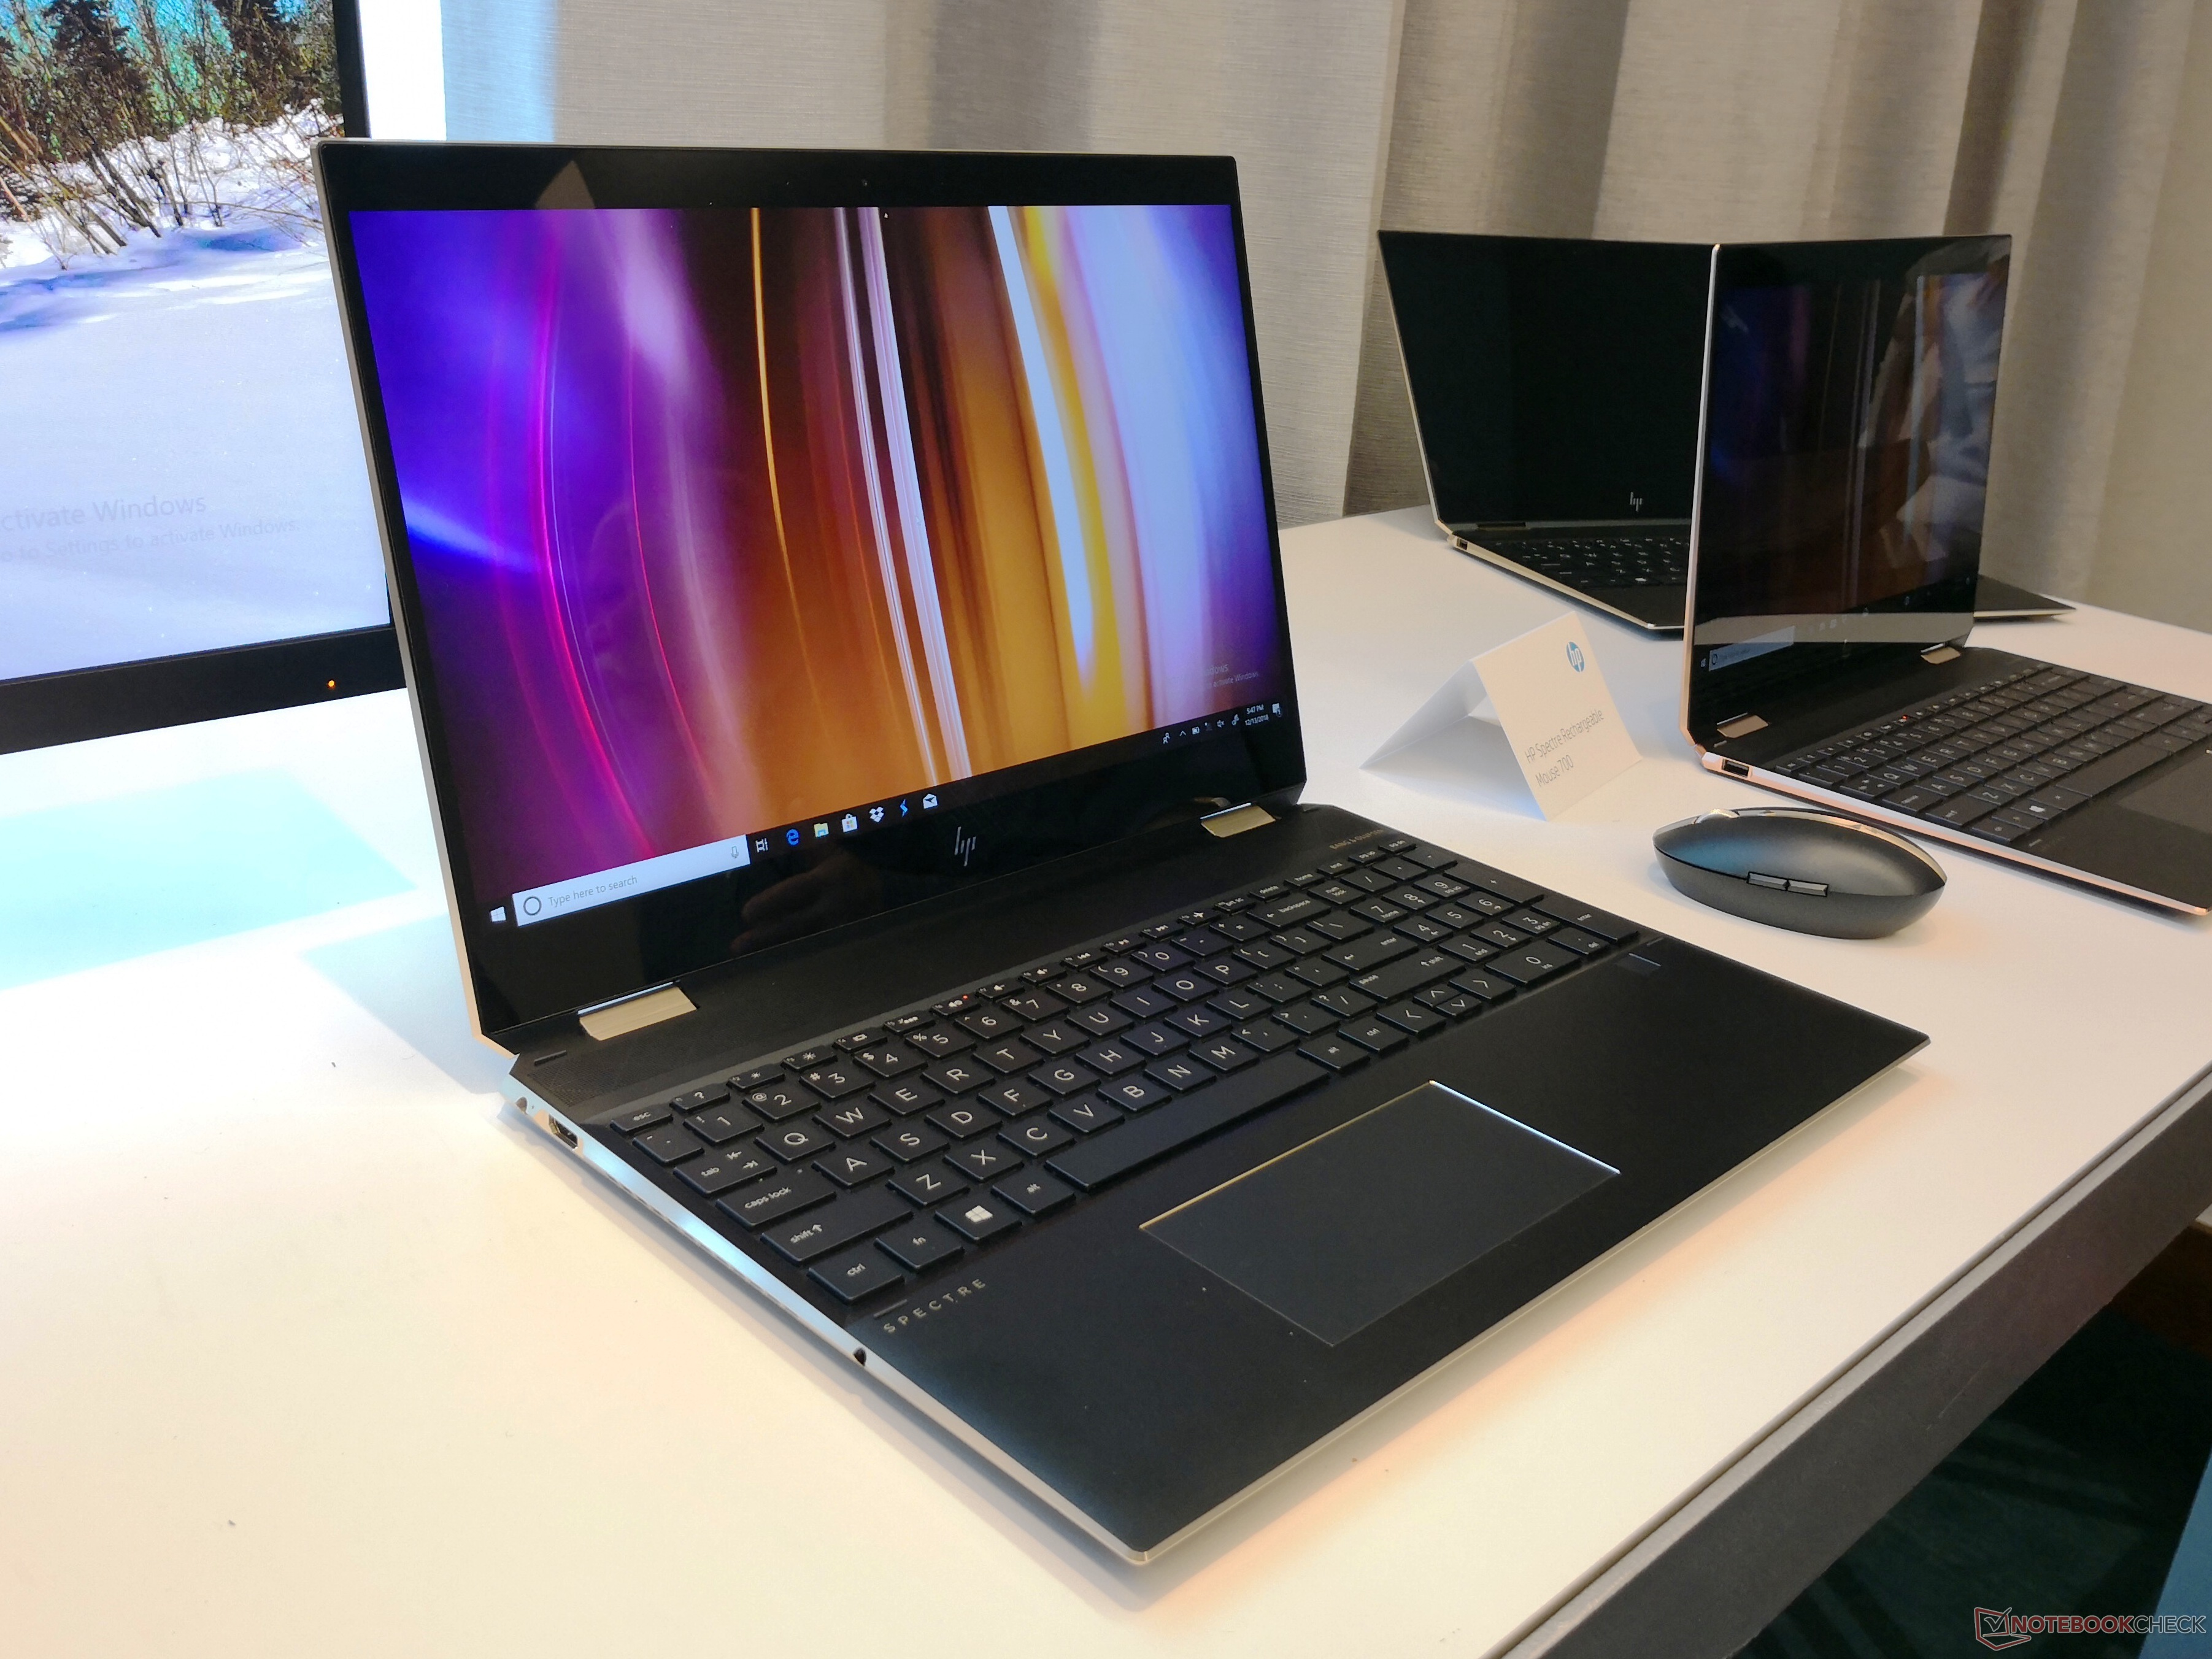 OLED is making a comeback on the HP Spectre x360 15 - NotebookCheck.net ...